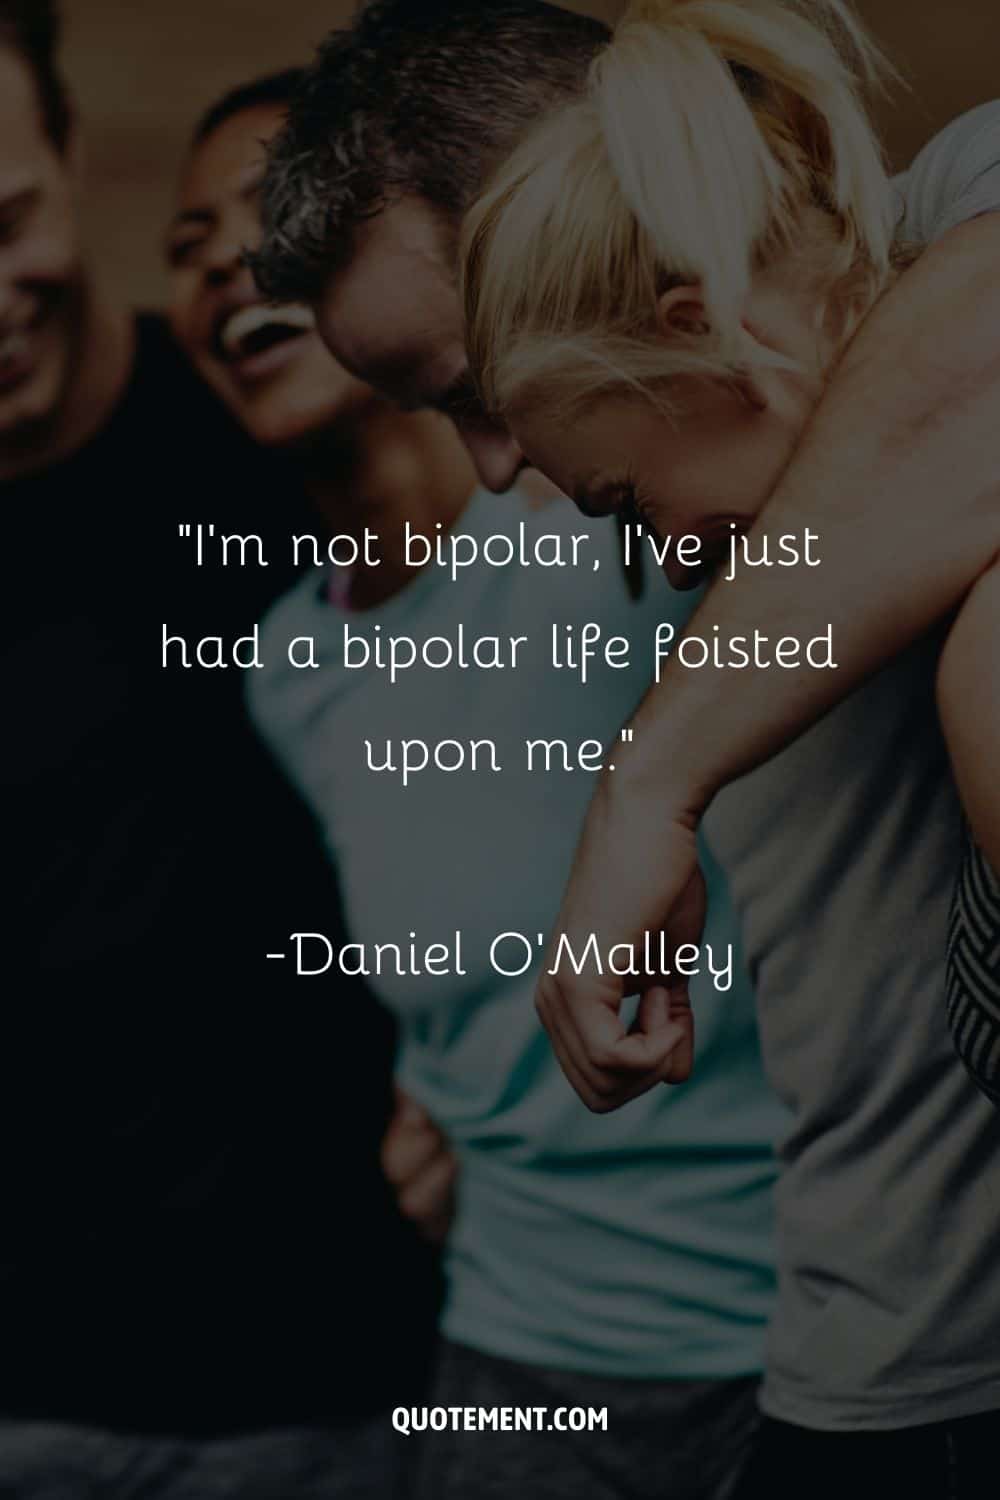 “I’m not bipolar, I’ve just had a bipolar life foisted upon me.” ― Daniel O'Malley, The Rook